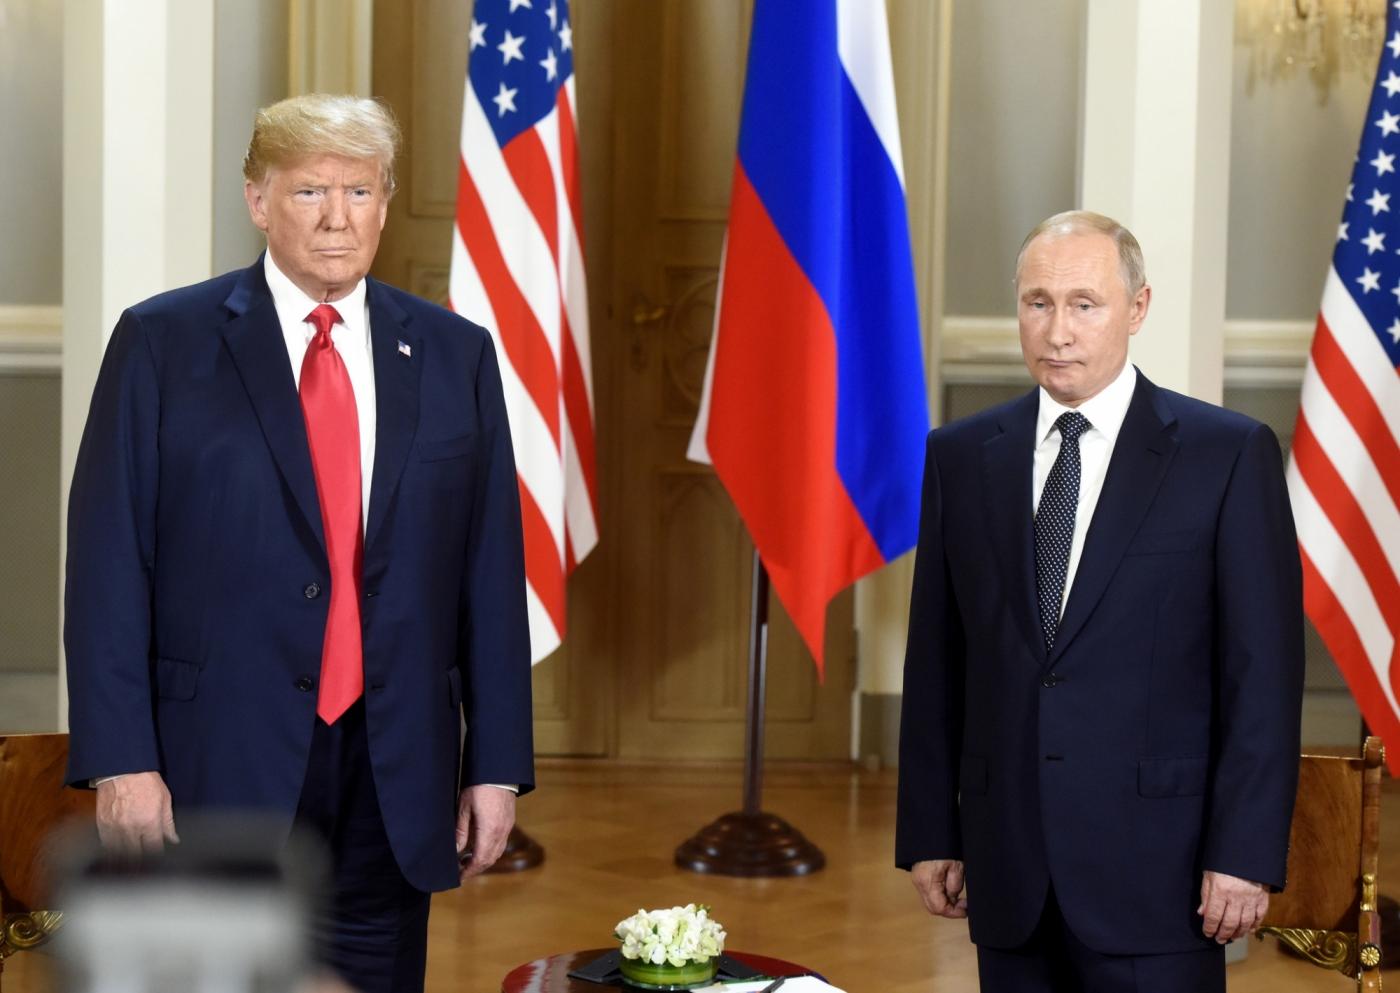 HELSINKI, July 16, 2018 (Xinhua) -- U.S. President Donald Trump (L) meets with his Russian counterpart Vladimir Putin in Helsinki, Finland, on July 16, 2018. U.S. President Donald Trump and his Russian counterpart Vladimir Putin started their first bilateral meeting here on Monday, and they are expected to discuss a wide range of issues. (Xinhua/Lehtikuva/Heikki Saukkomaa/IANS) by .